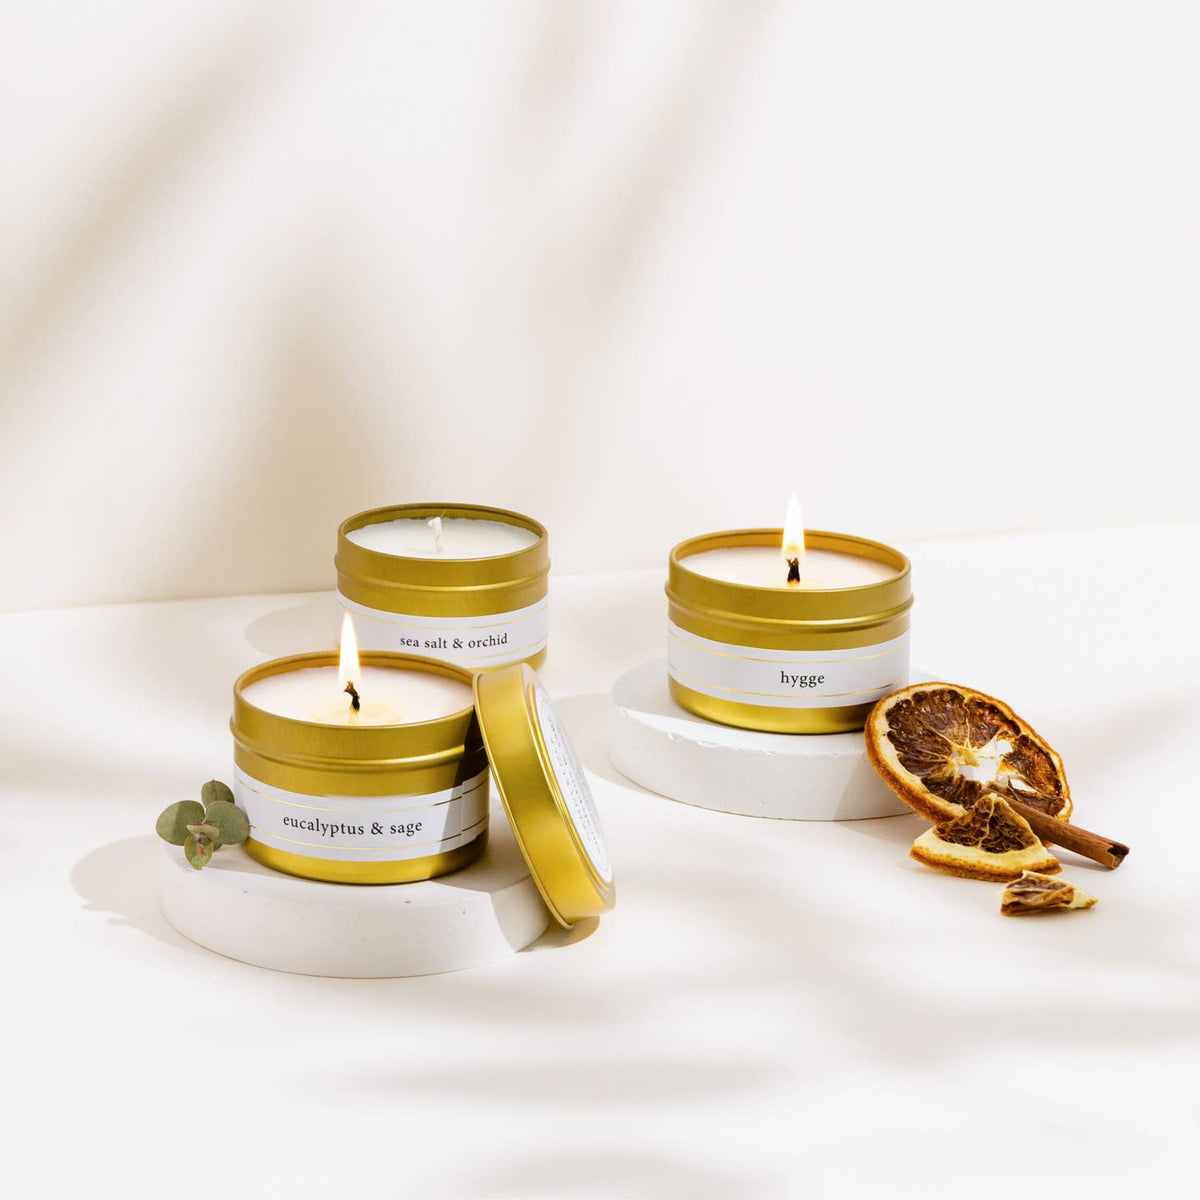 Matcha + Mint Candle by L'apothicaire Co.